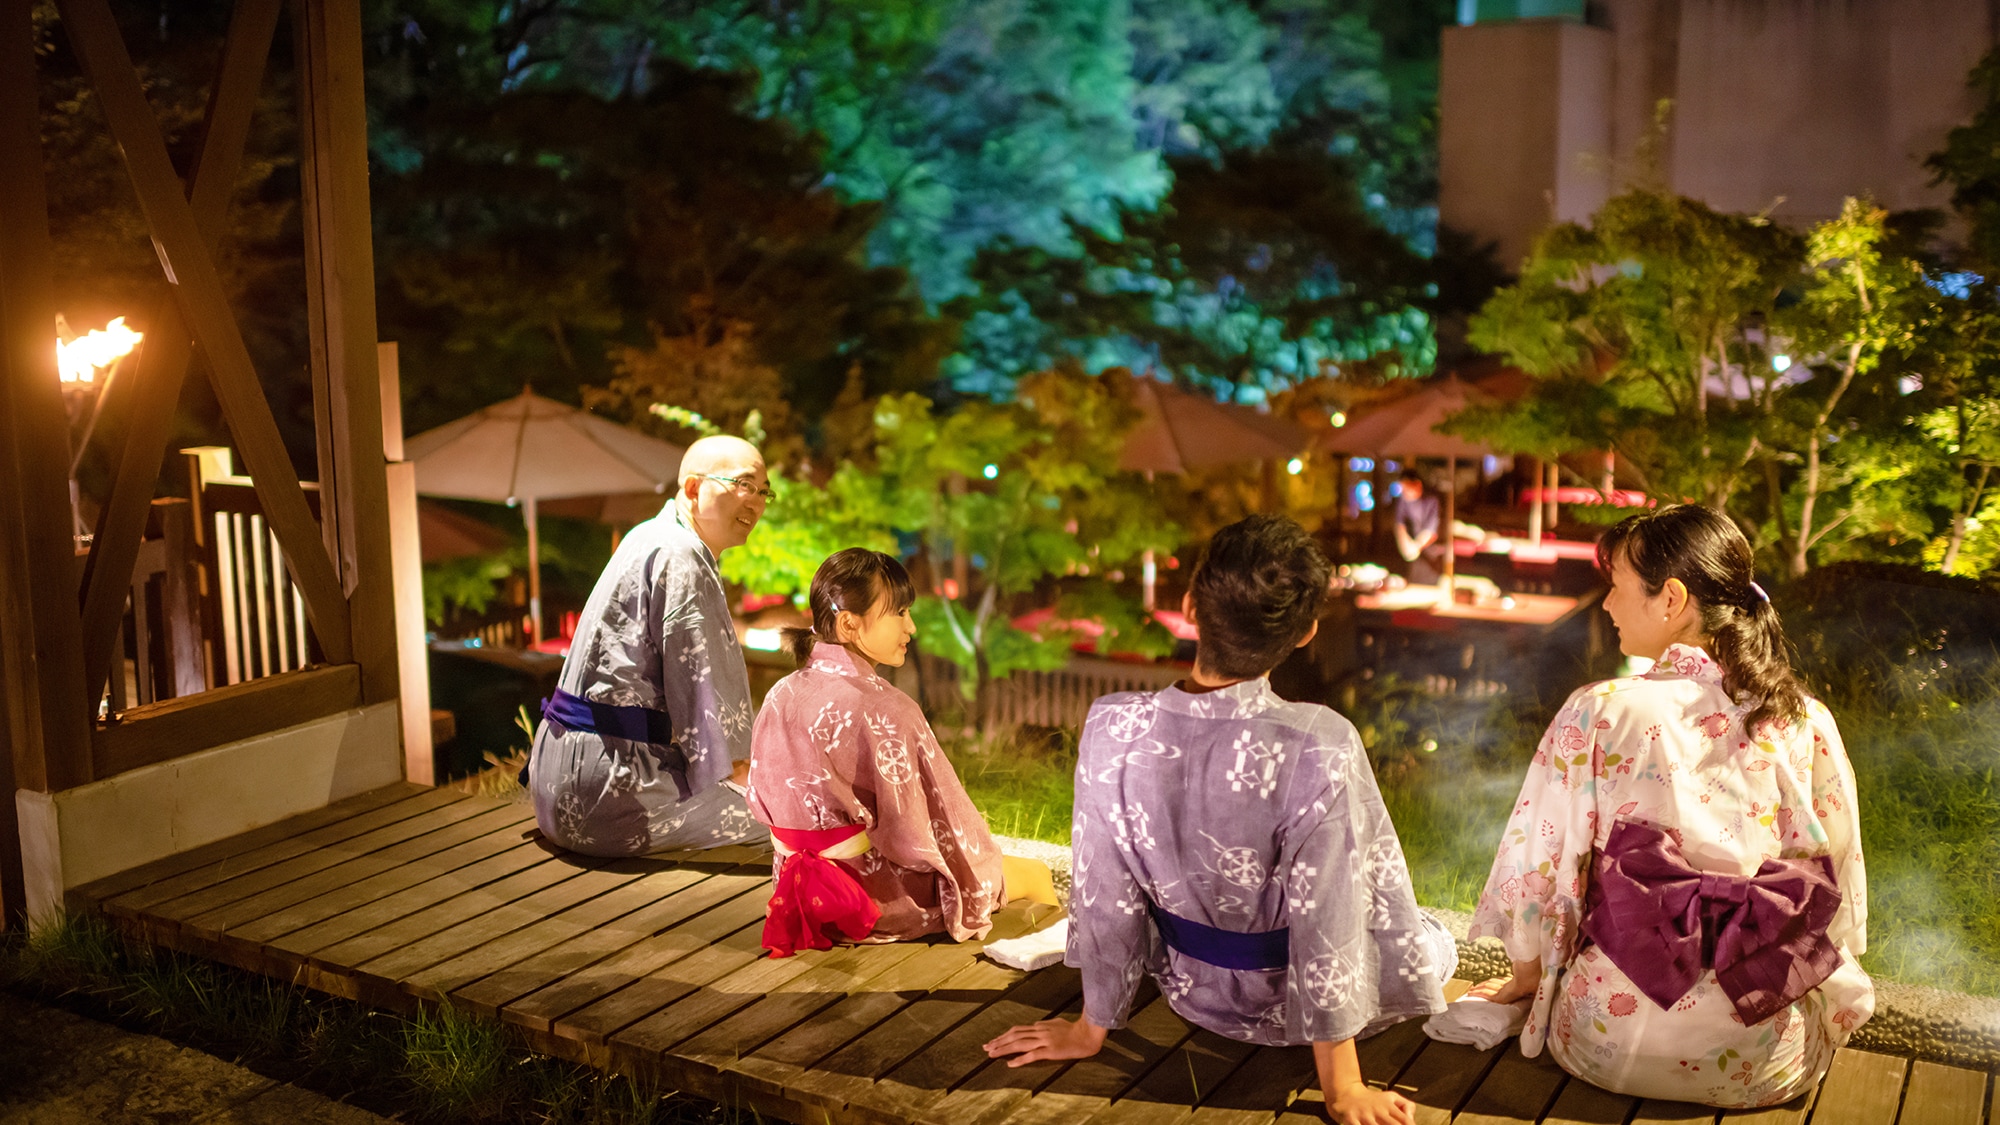 ■ River Doko ~ Ashyu ~ ■ A moment of gathering while looking at the river where it is lit up and has a fantastic atmosphere.